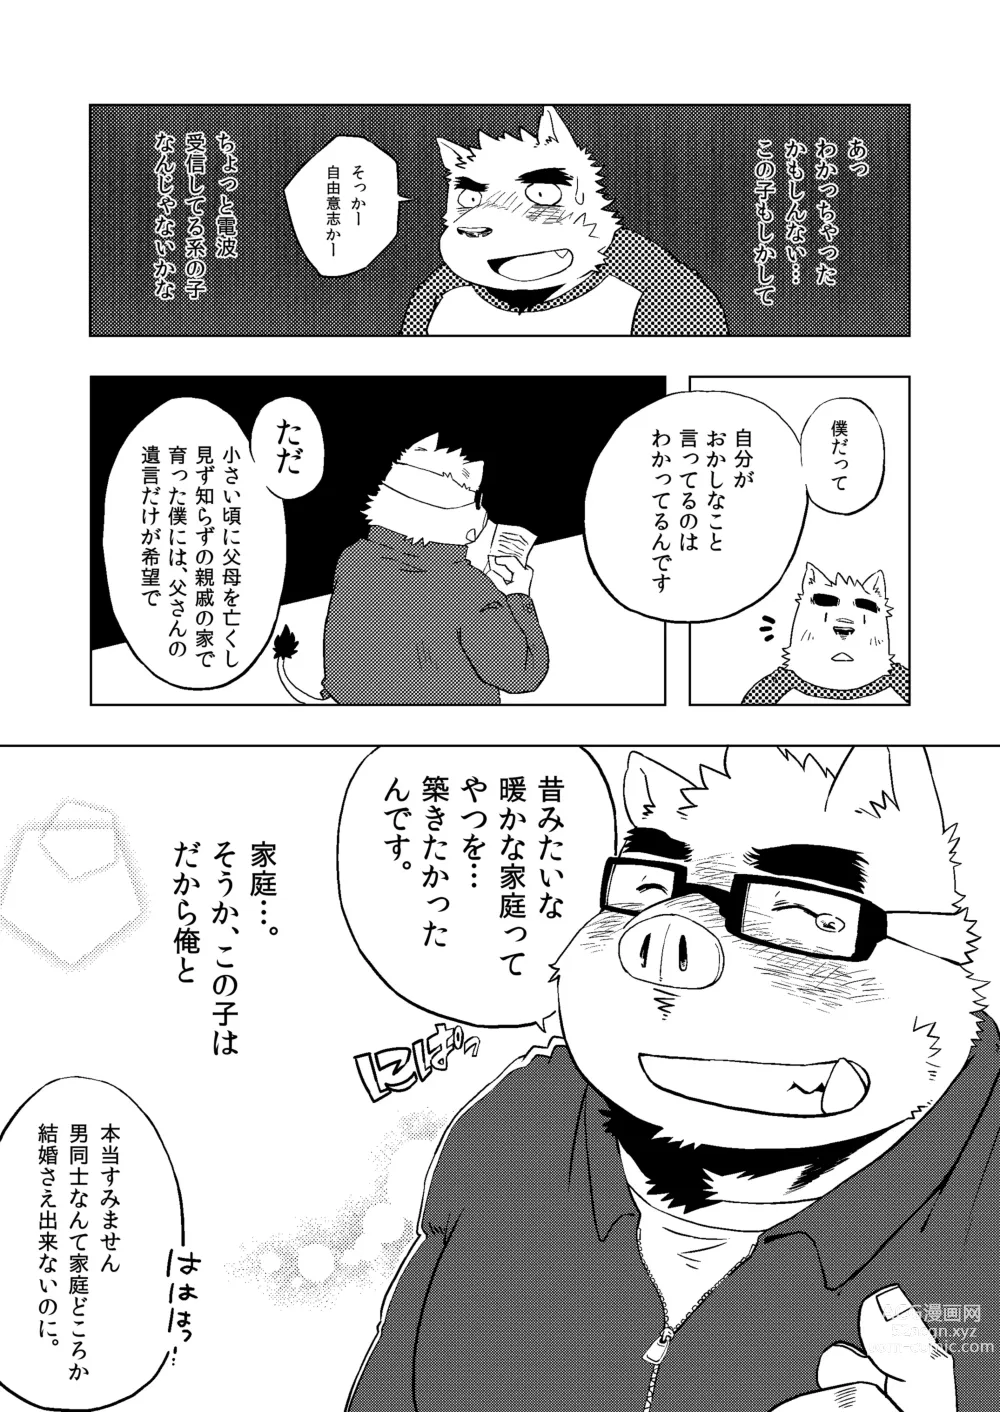 Page 8 of doujinshi Is it true that you are getting married!?